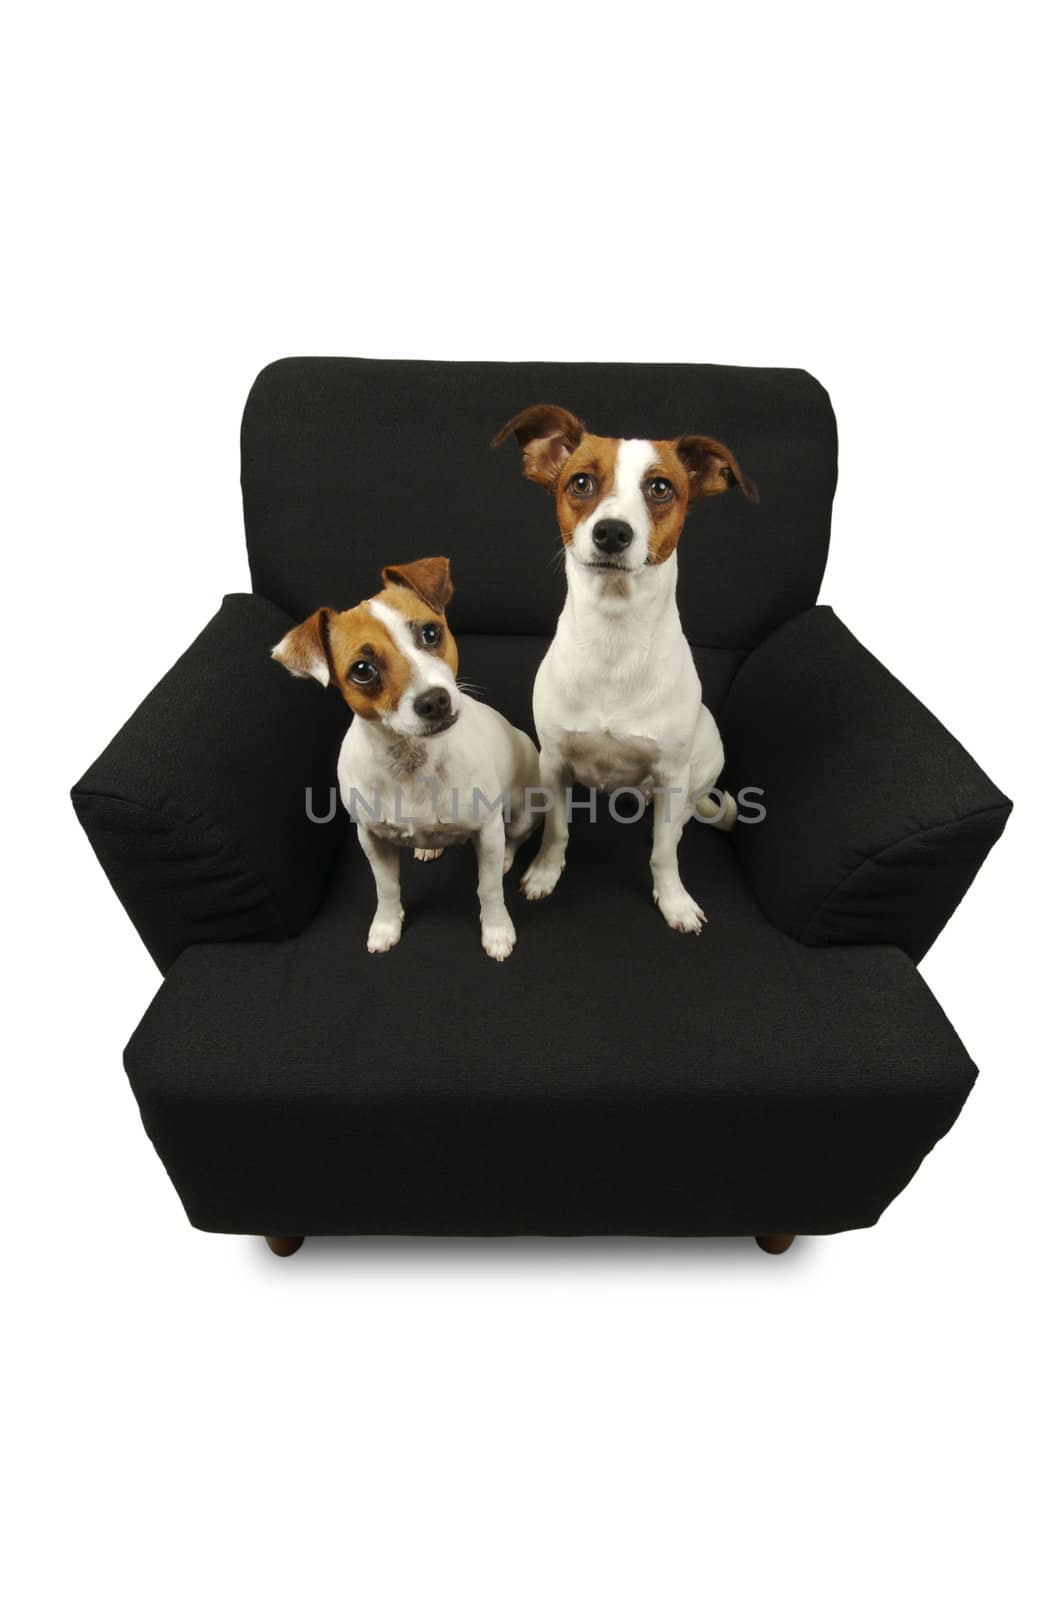 Two Jack Russell Terriers on a black chair by Feverpitched